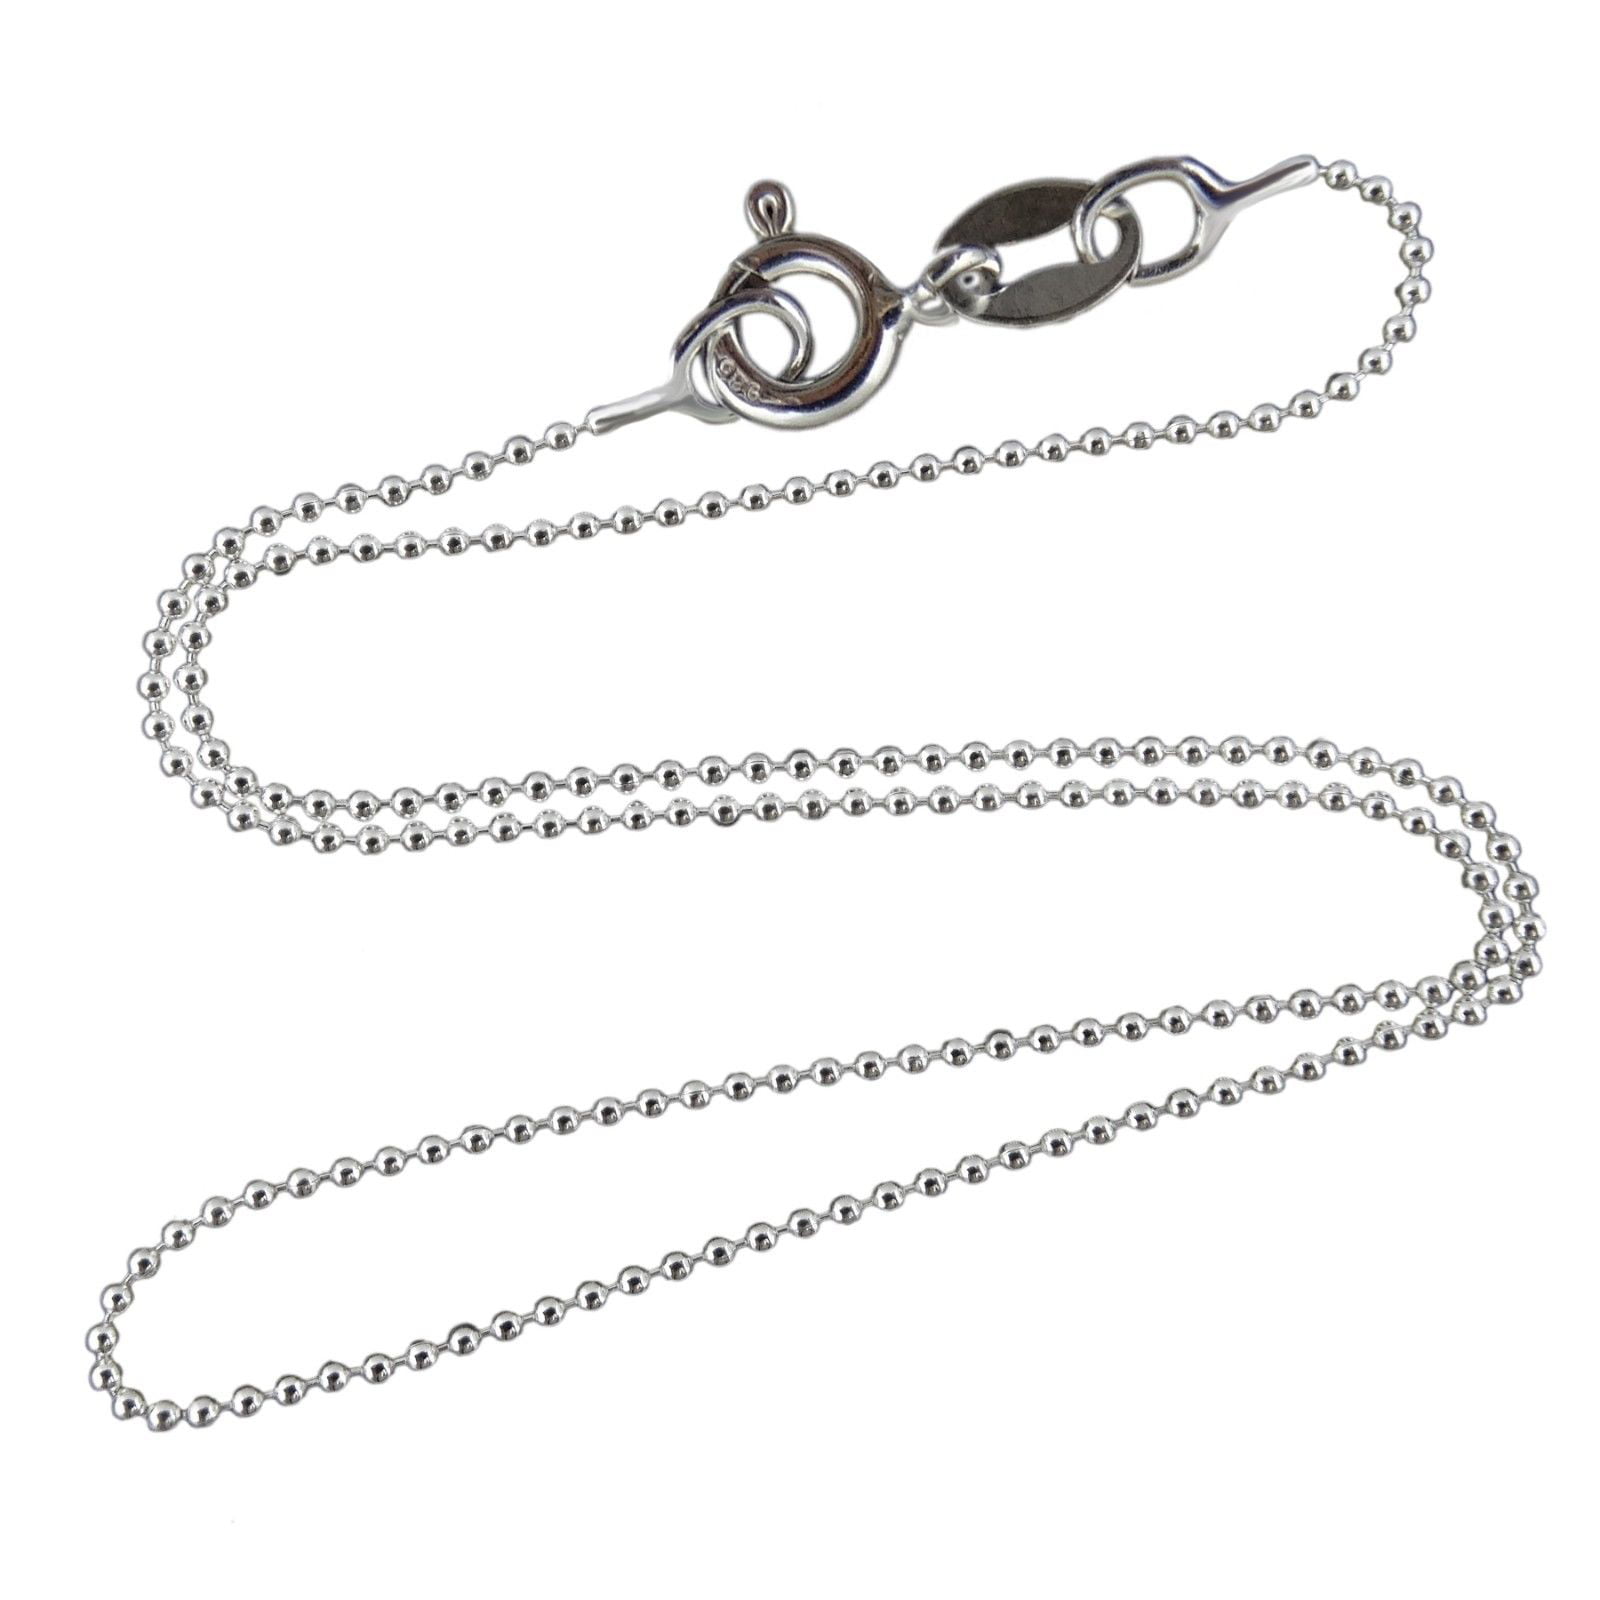 ITALY-925 Sterling Silver BEAD & BAR 1+1 Chain Necklace-Ball and Bar-16" 18" 20"